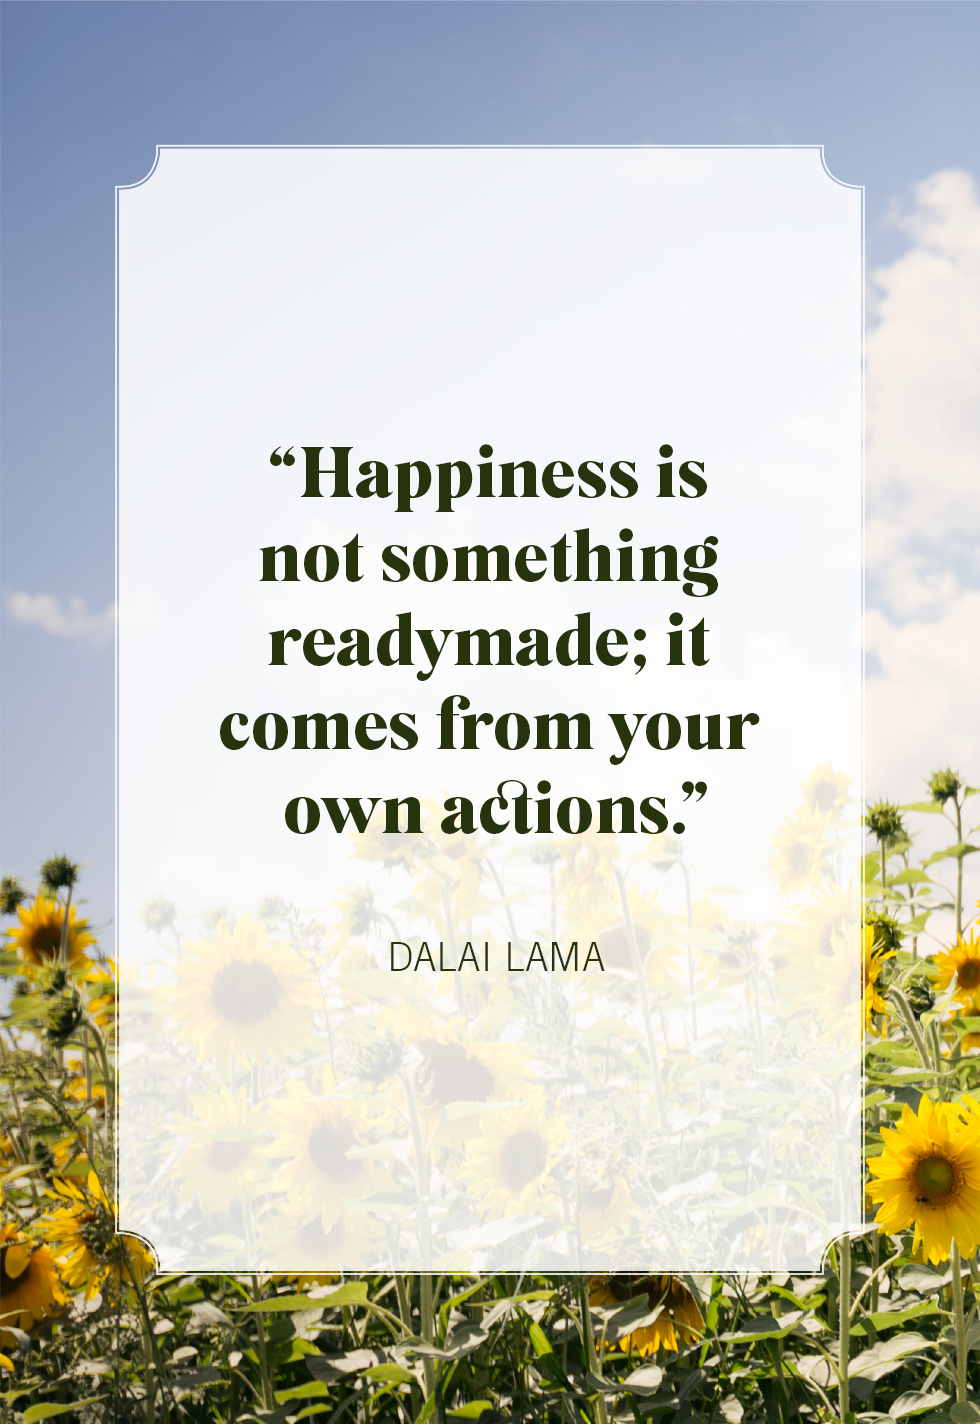 inspiring quotes on life and happiness